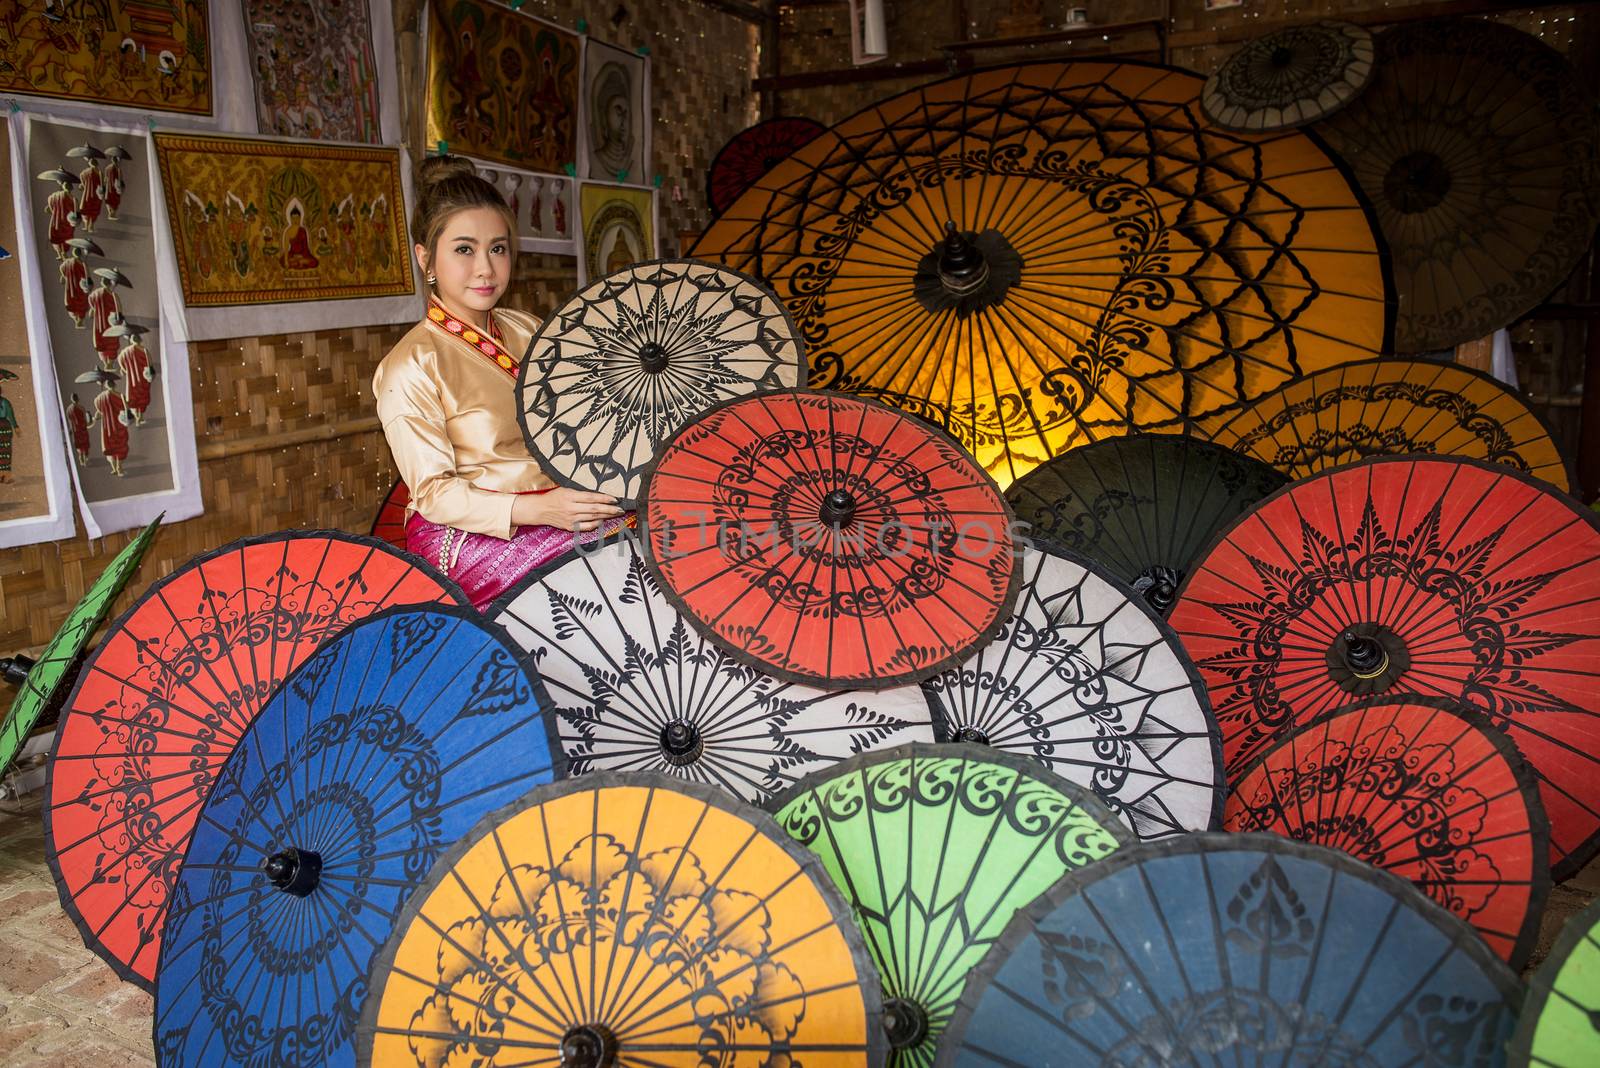 Asian Women in Colorful Umbrella Souvenier Shop at Bagan, Mandal by chanwity